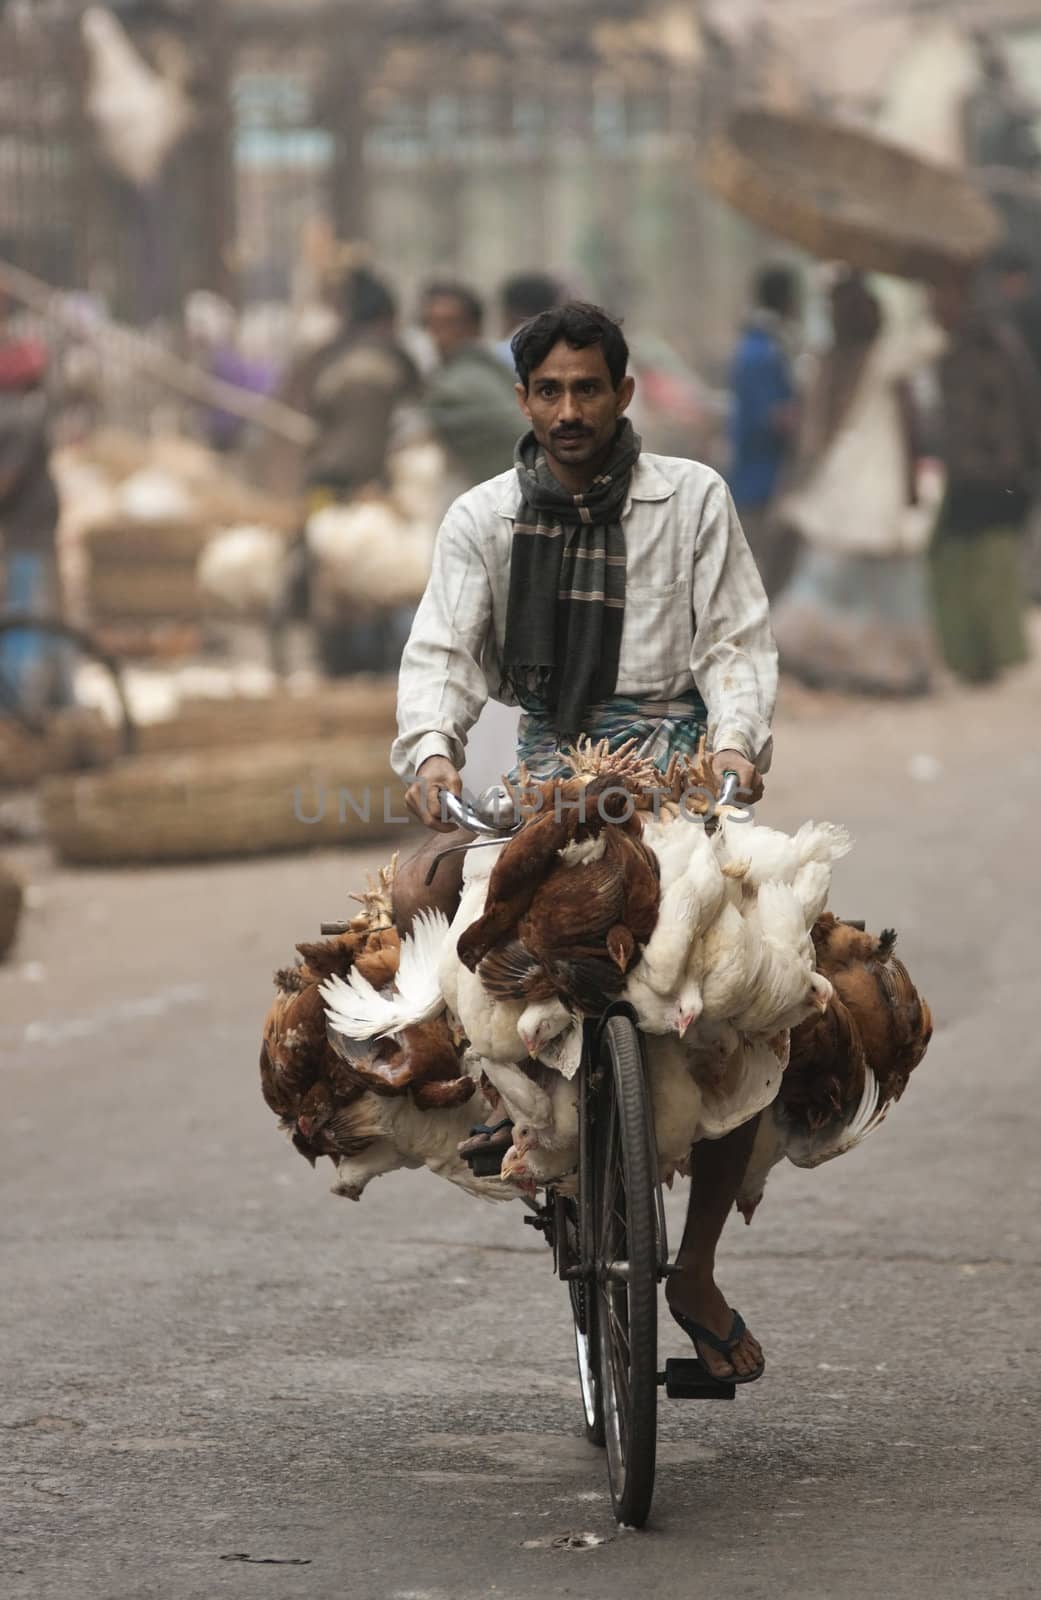 Man riding a bicycle loaded with chickens along a city street in Calcutta, West Bengal, India.